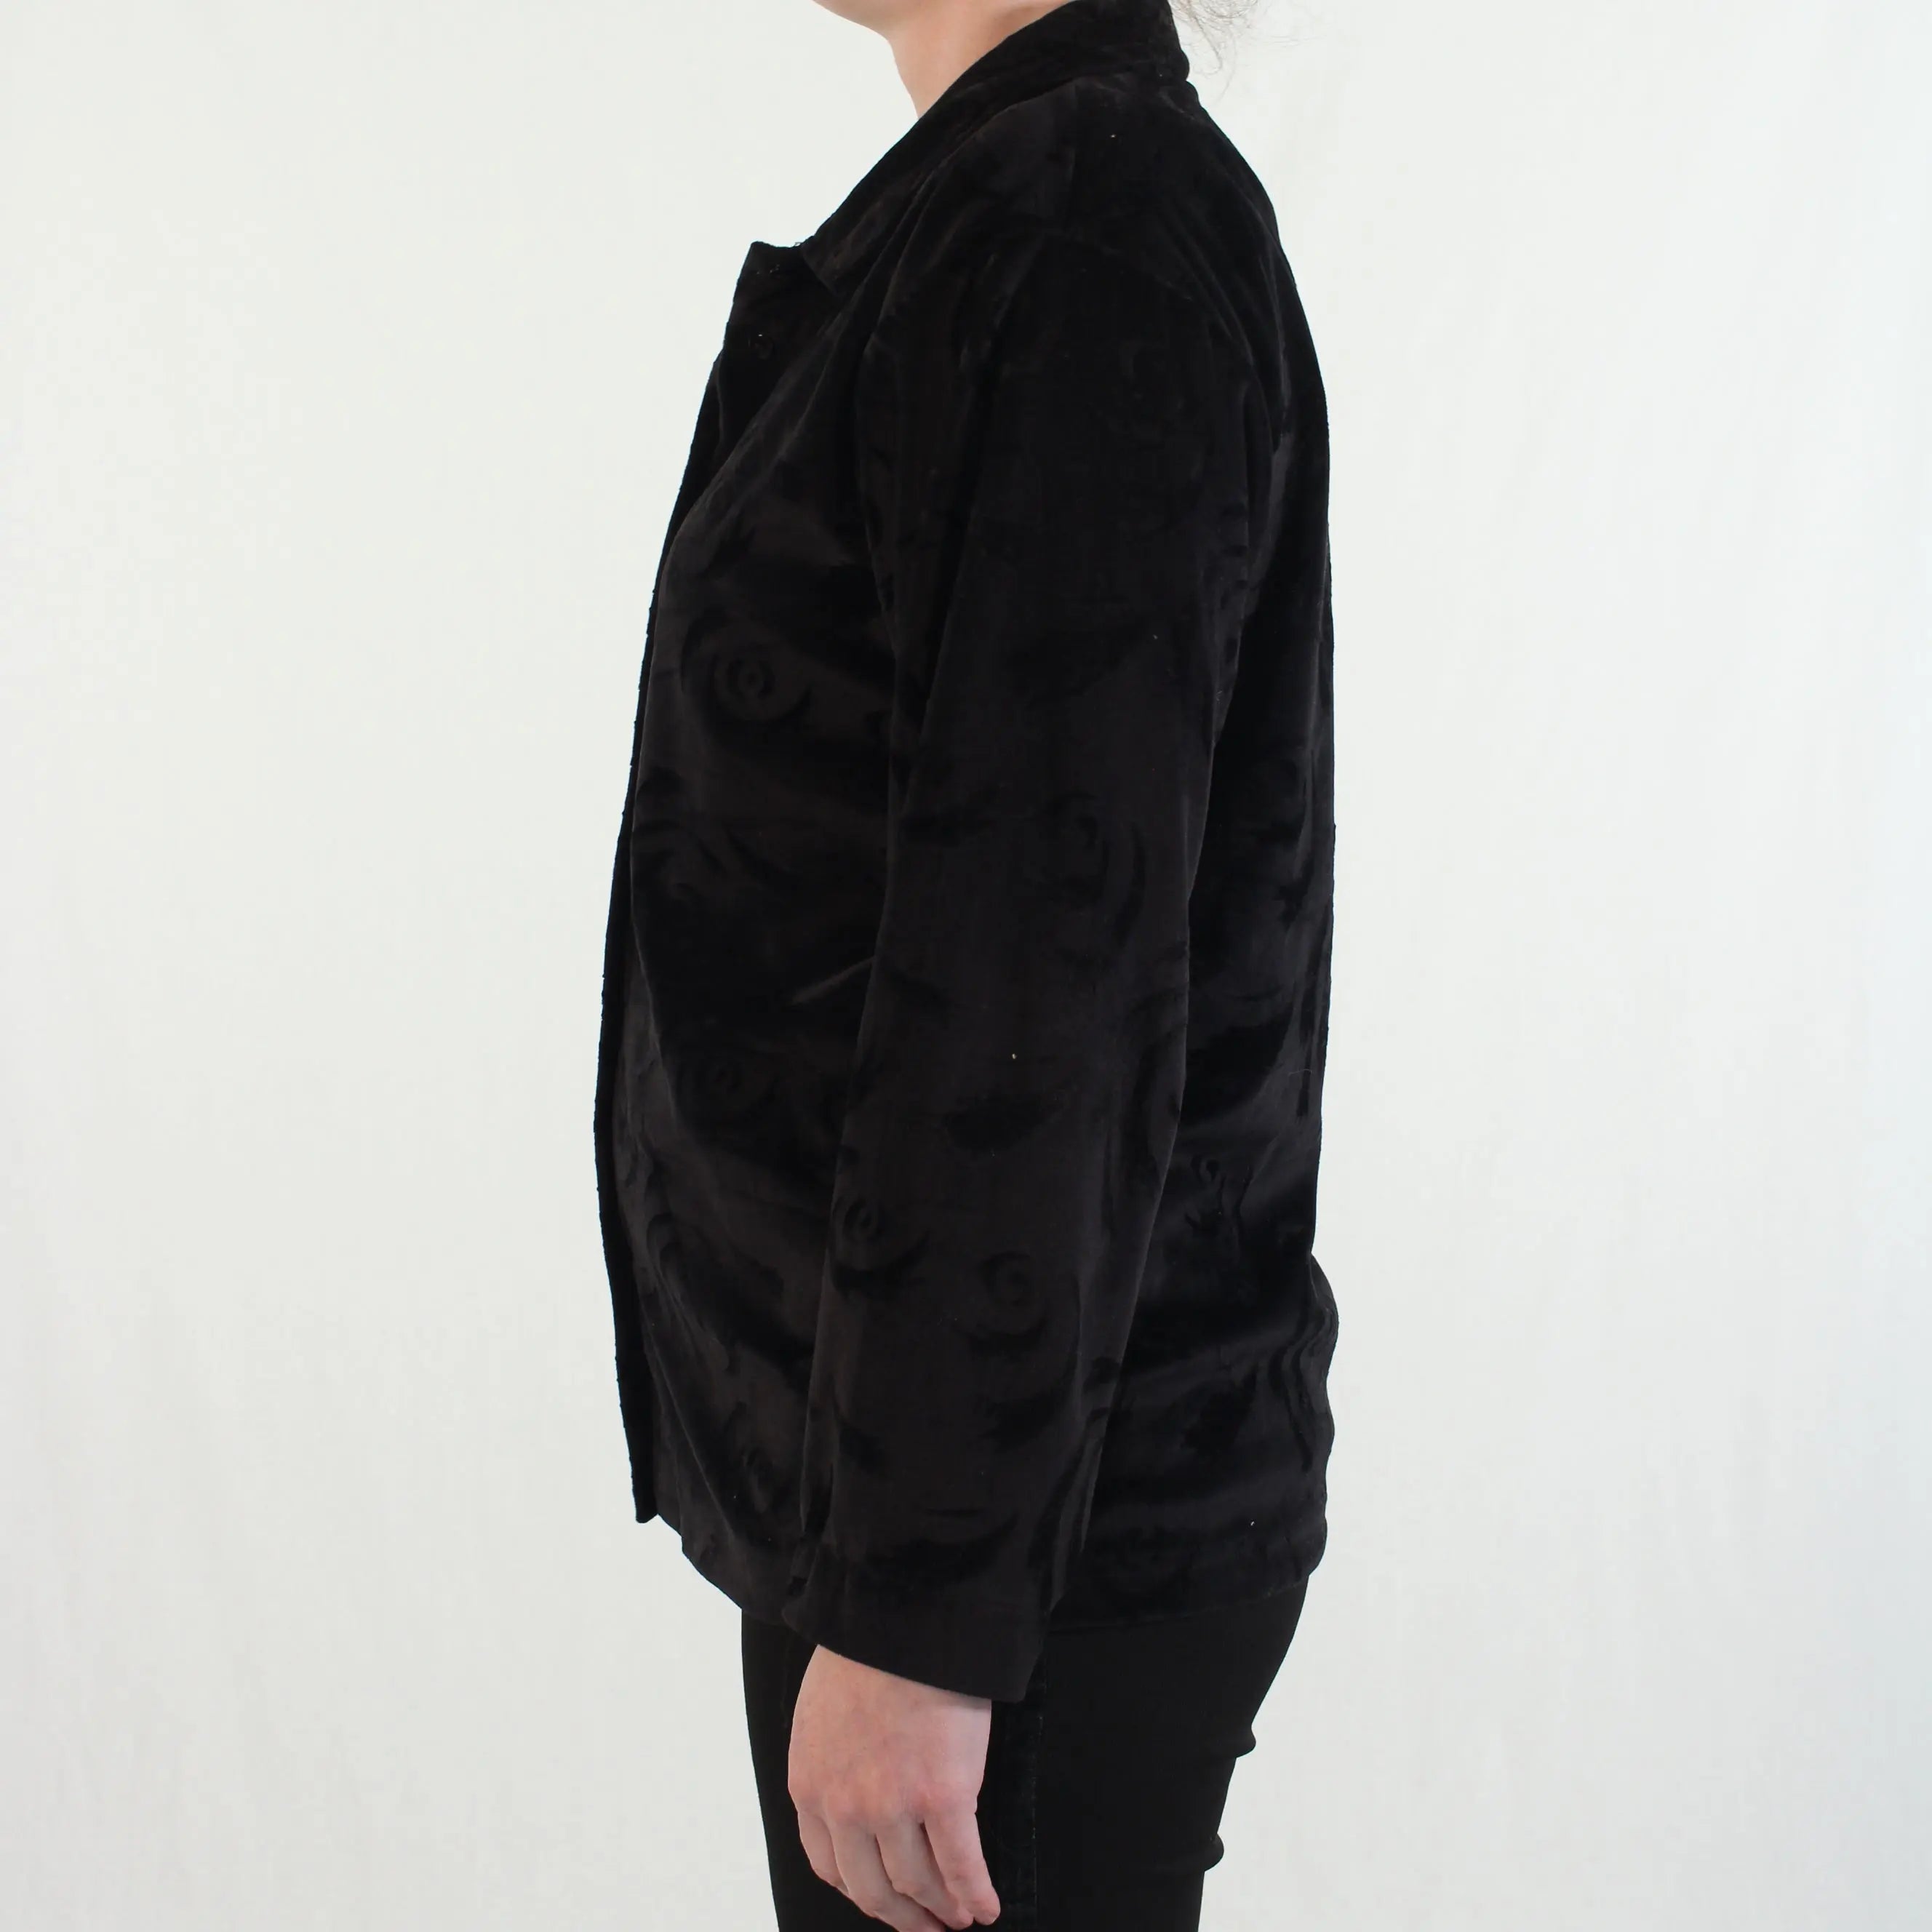 Unknown - Black Velvet Blouse- ThriftTale.com - Vintage and second handclothing